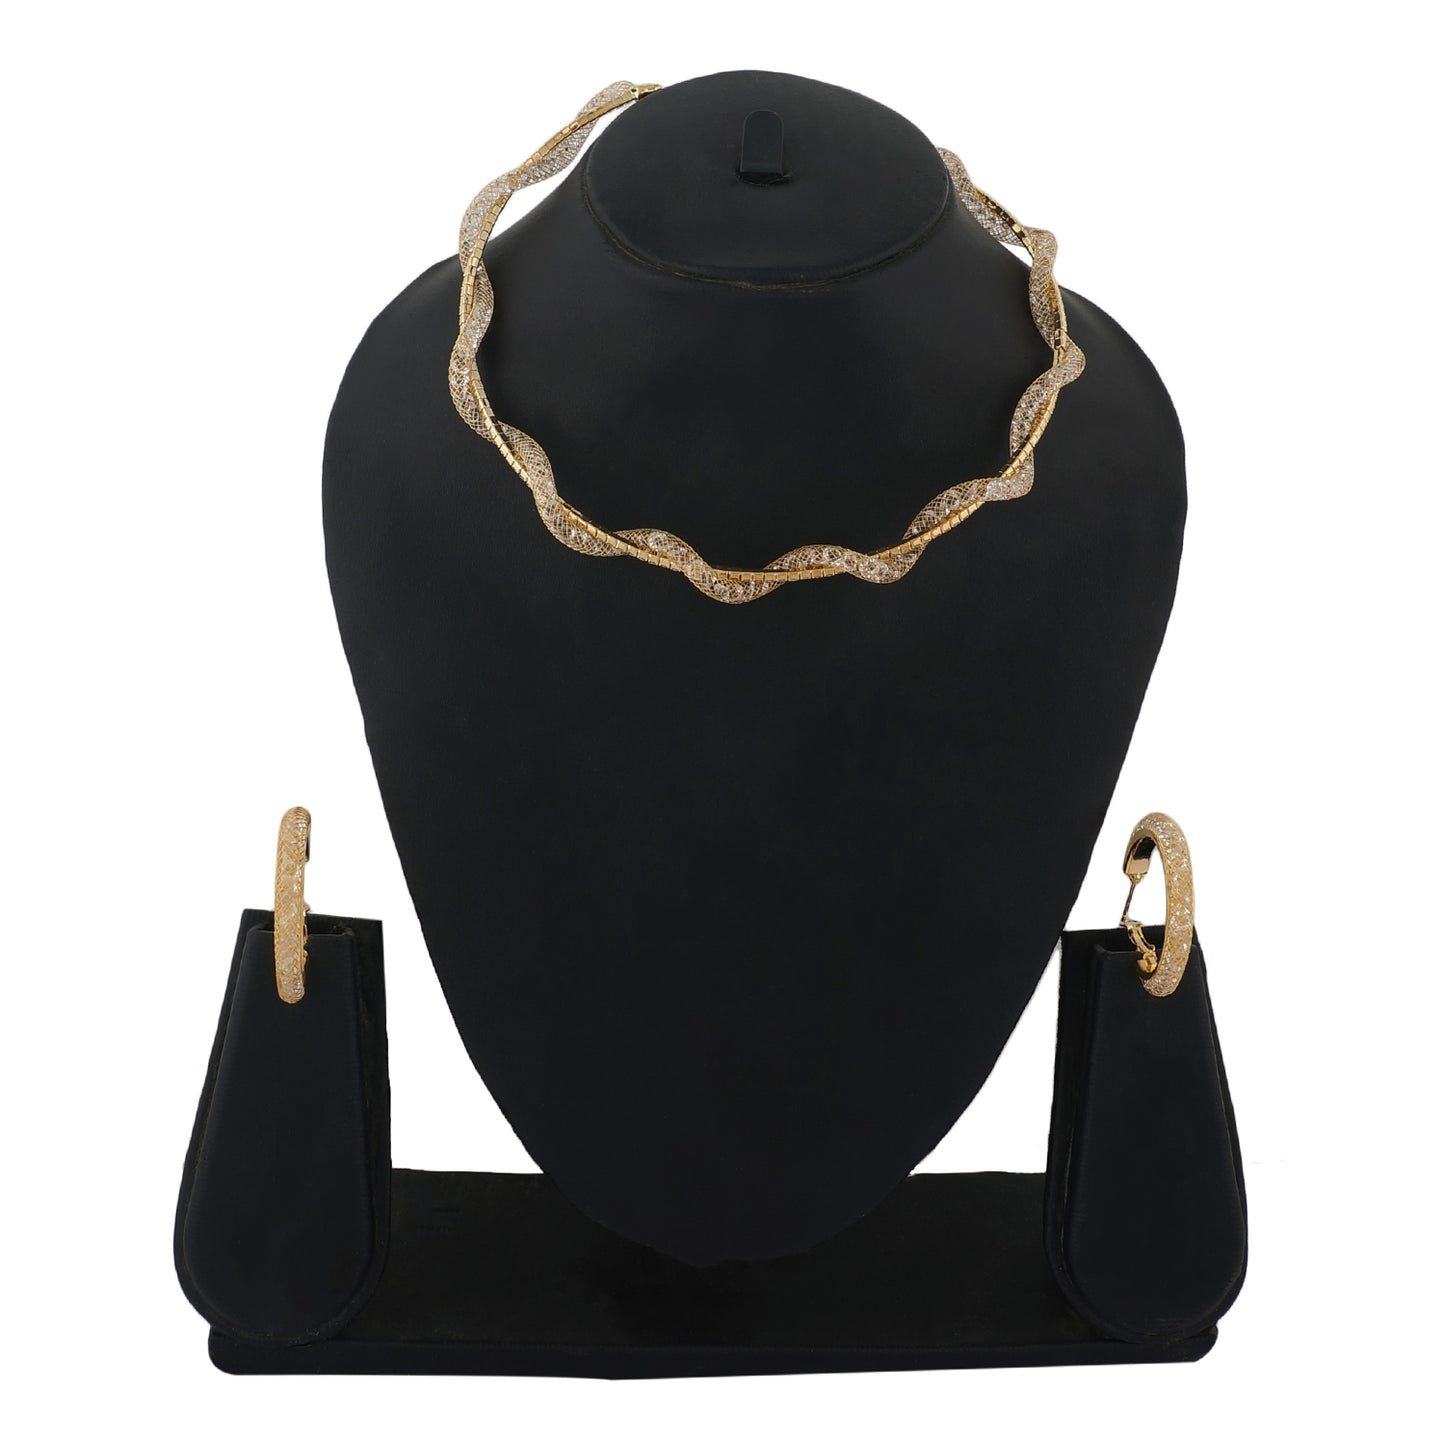 Gold Colour Formless Necklace and Earrings for Girls and Women